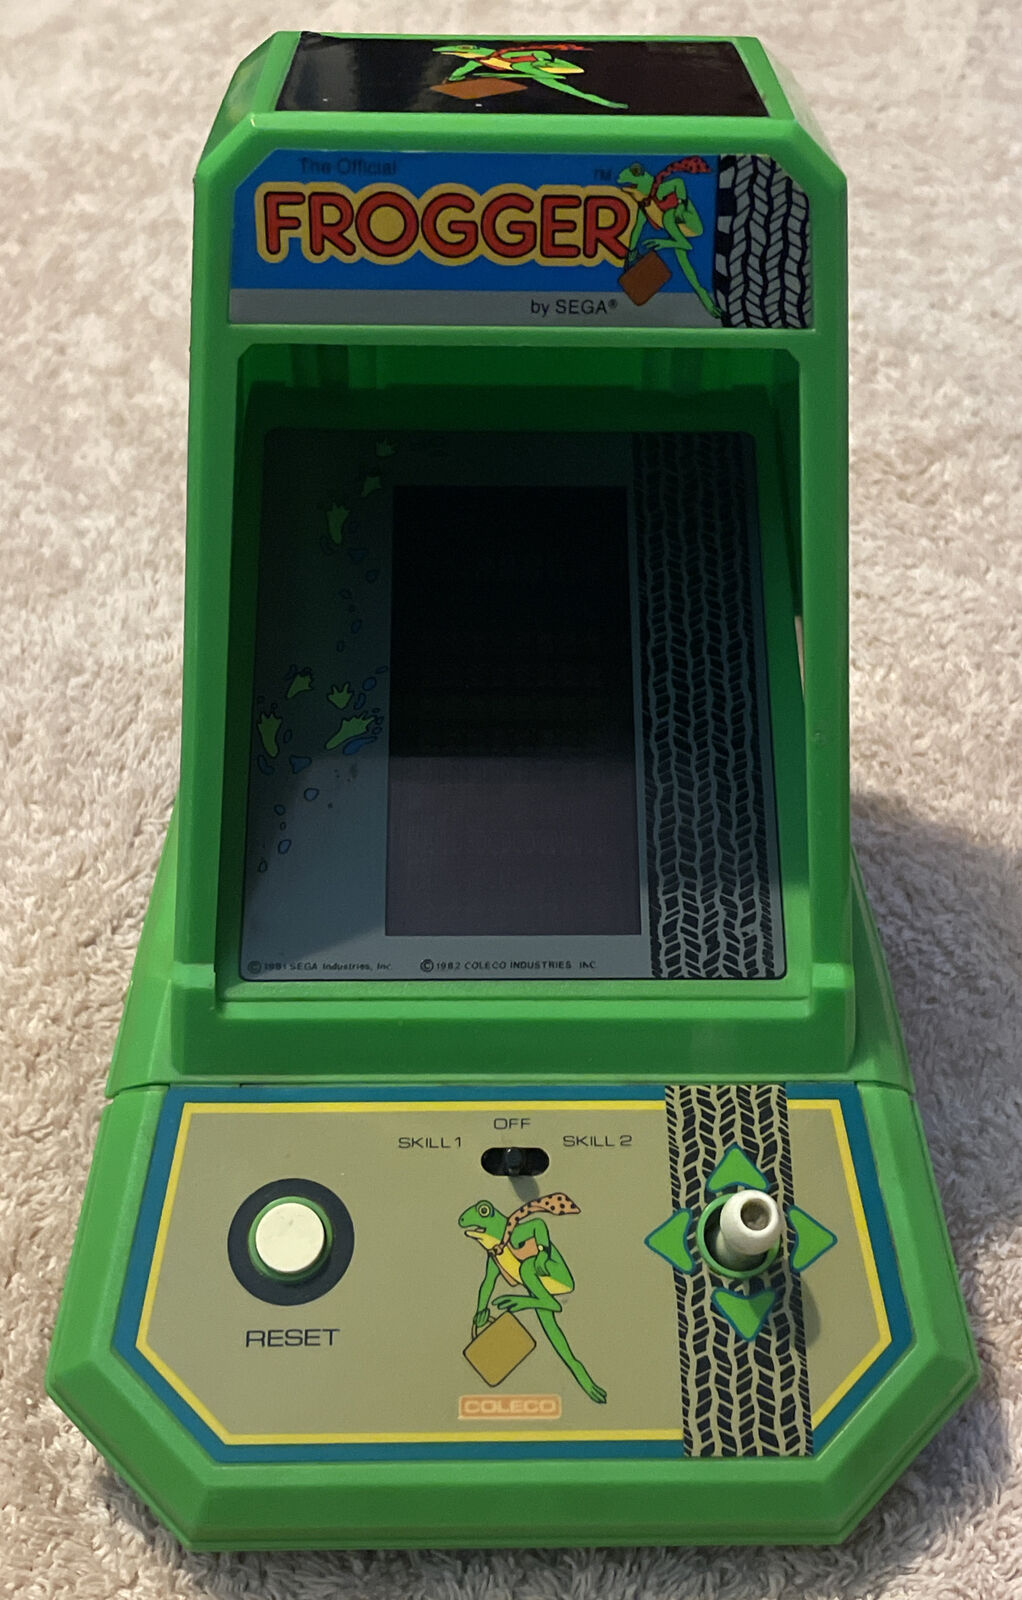 1982 Coleco Frogger by Sega Tabletop Arcade Game No. 2393 - As Is